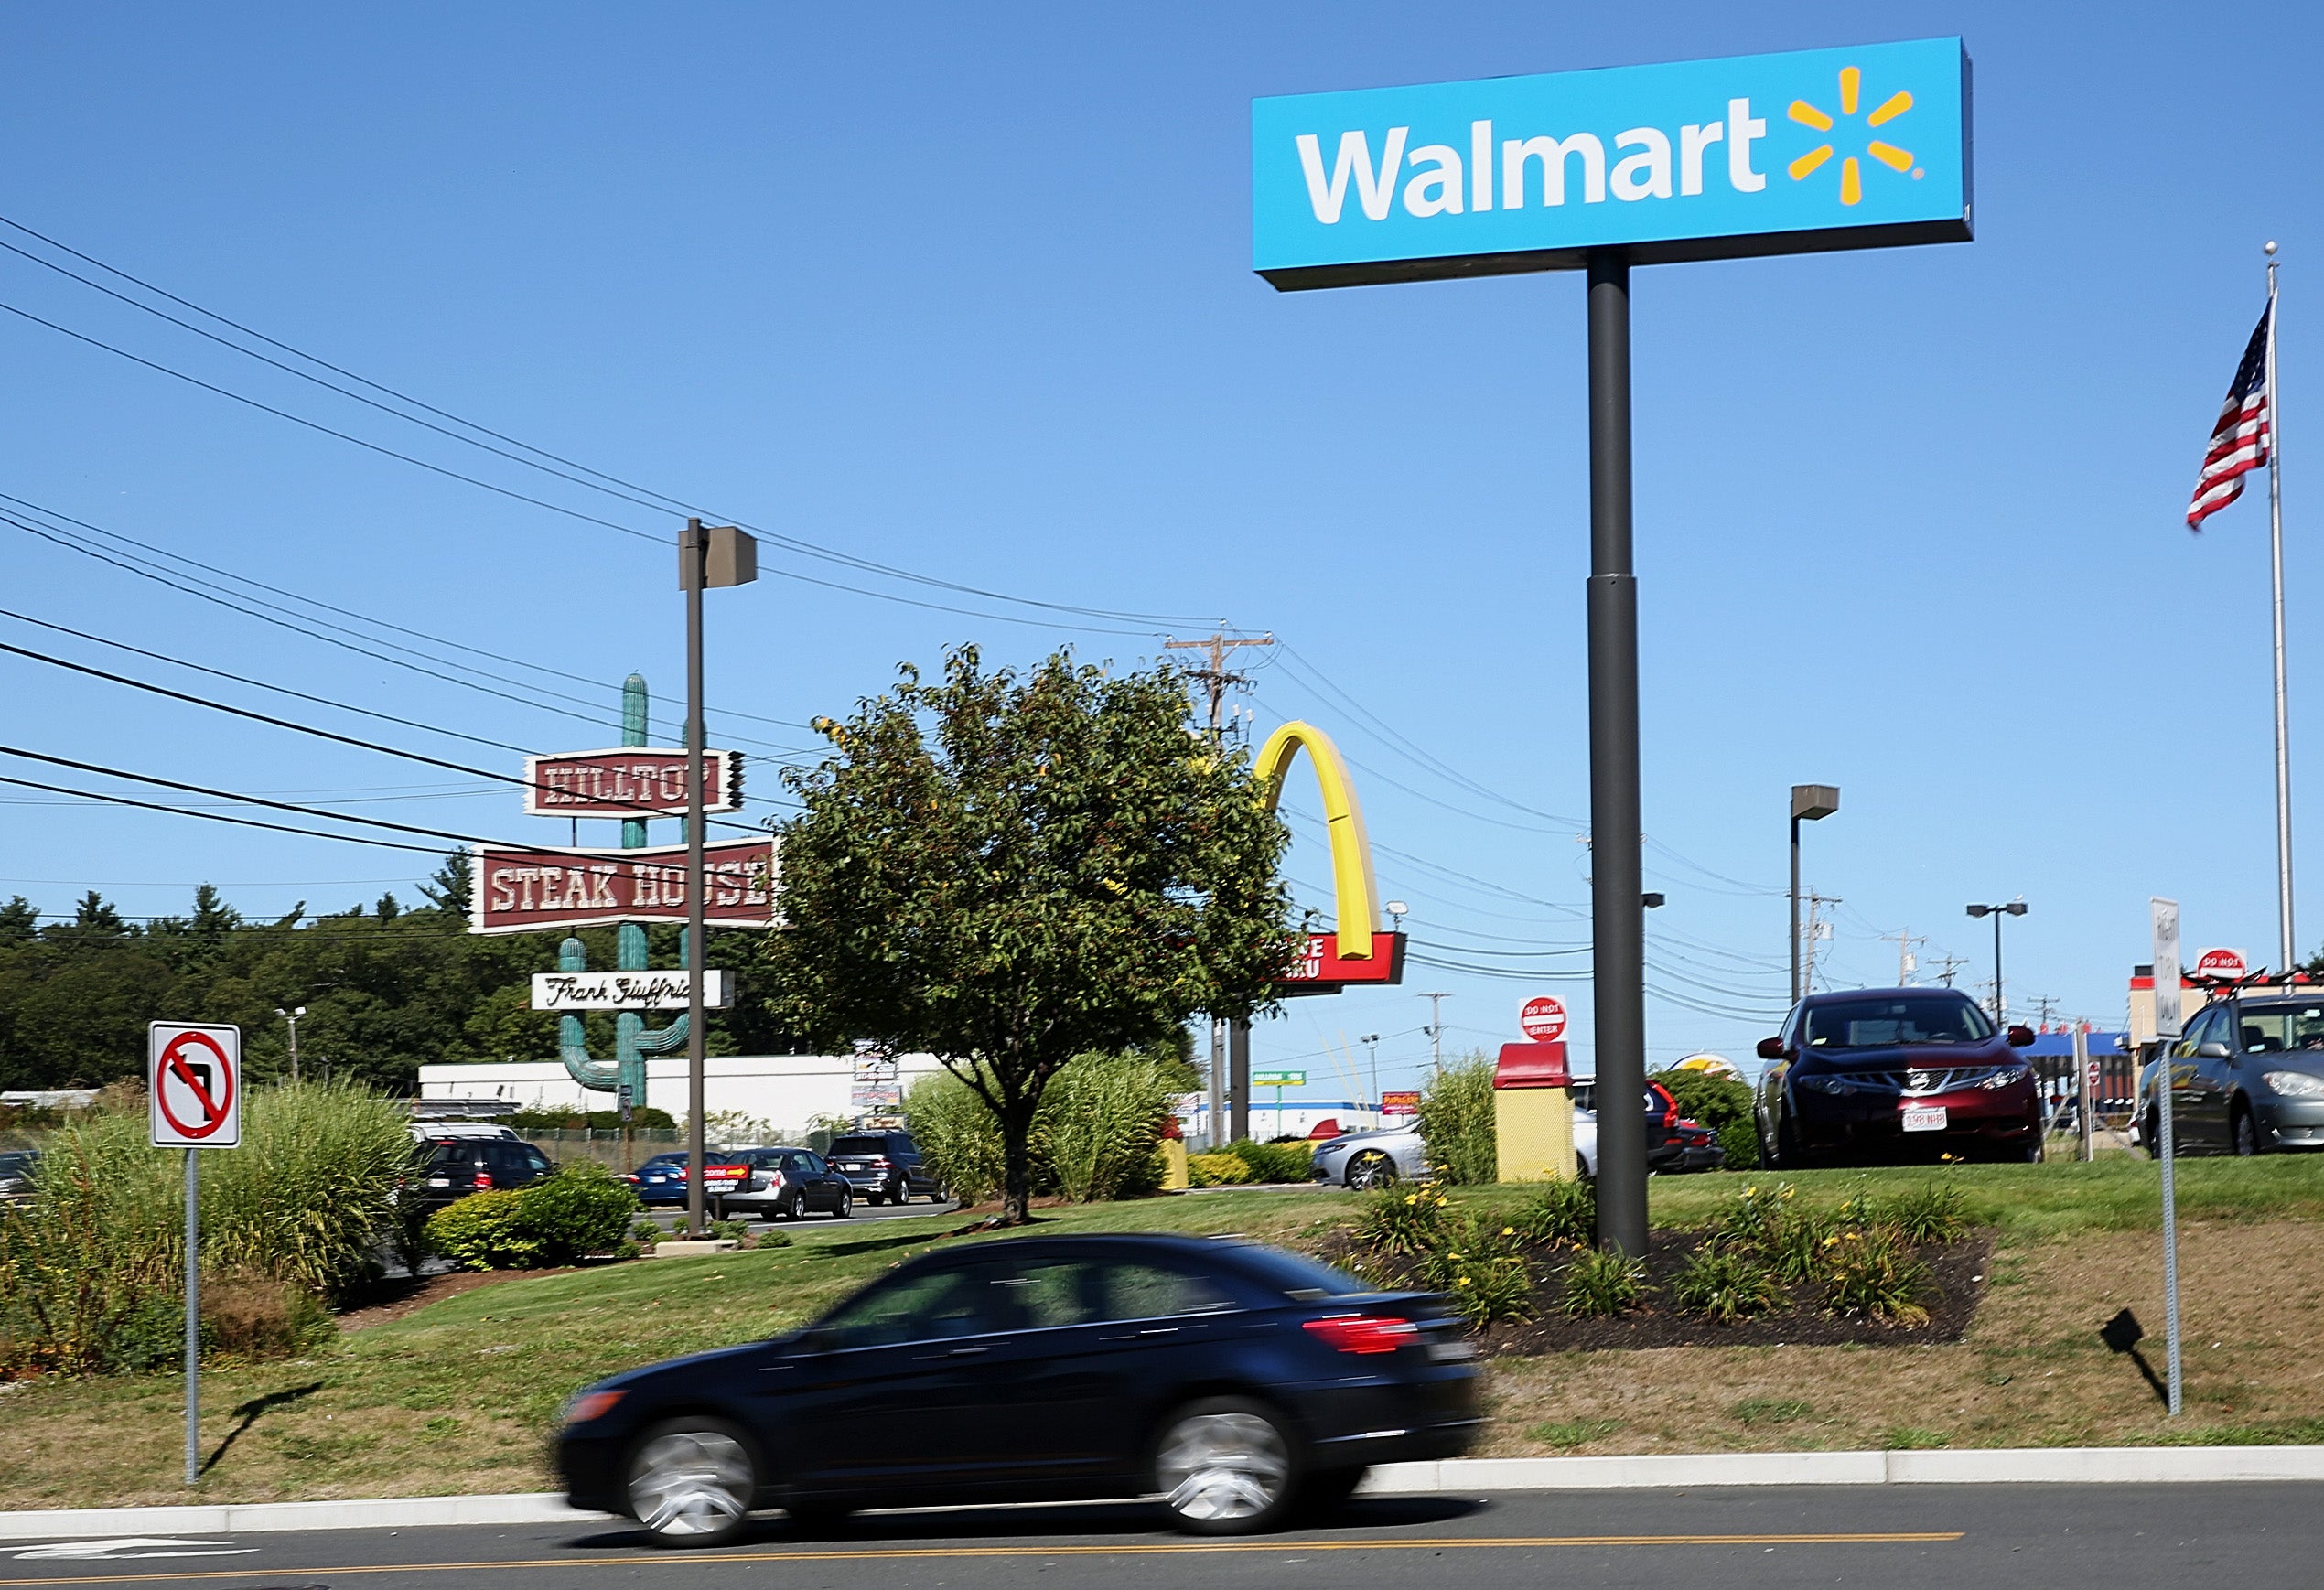 Saugus Walmart opens on Route 1 North